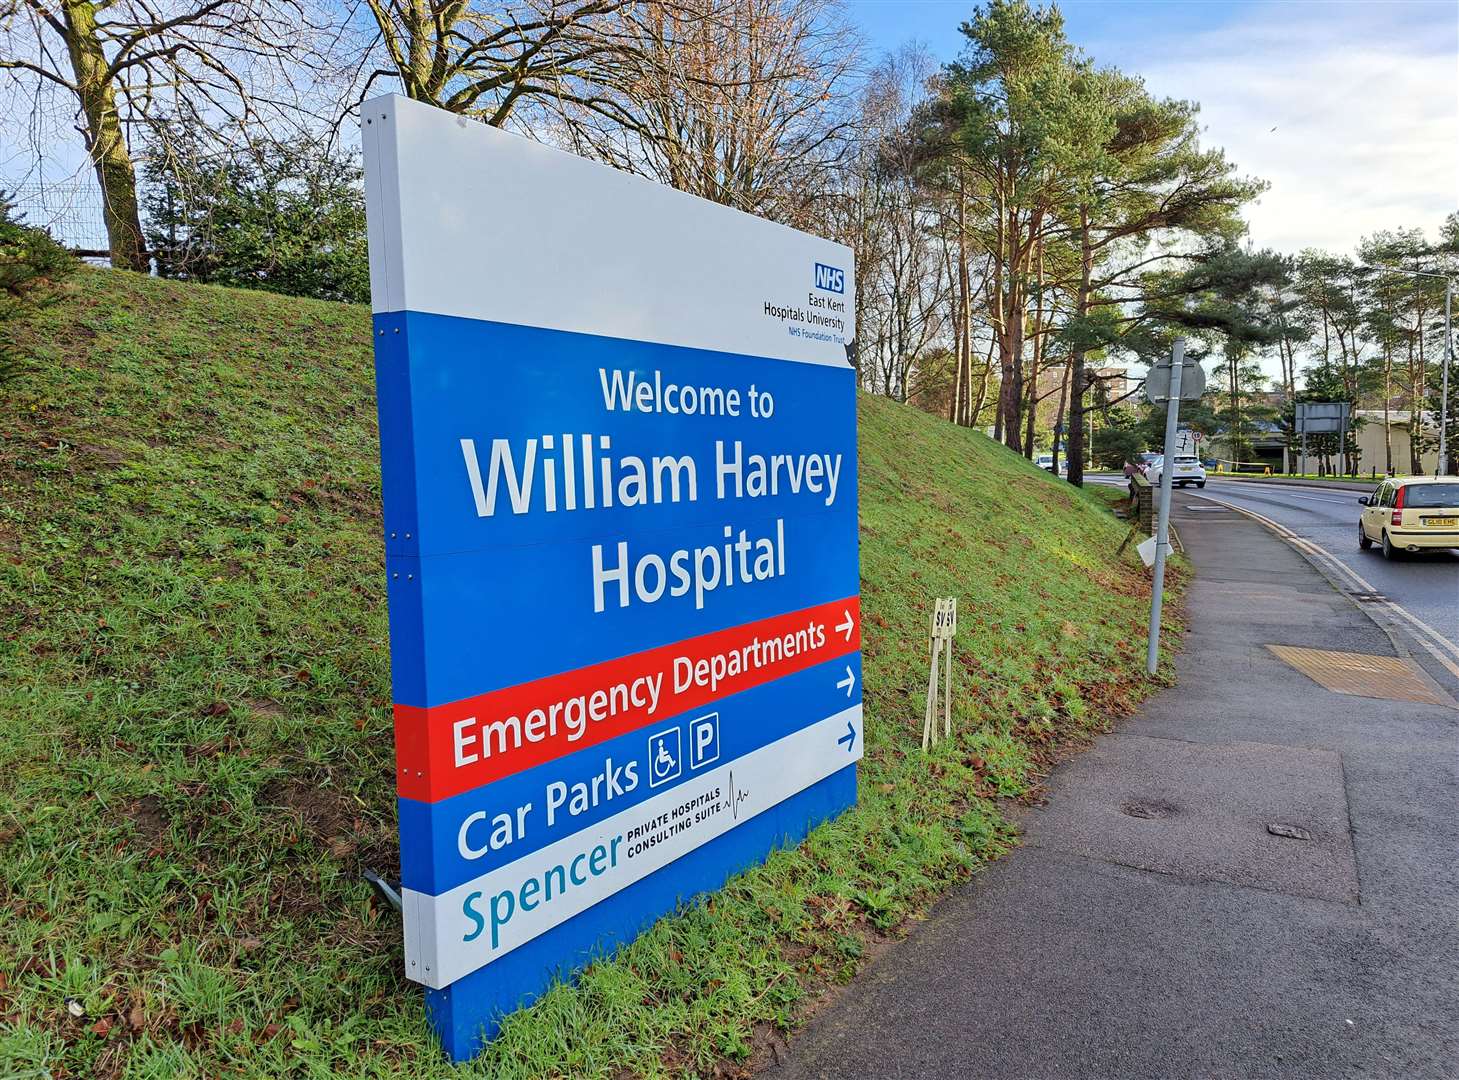 He was treated at the William Harvey Hospital in Ashford